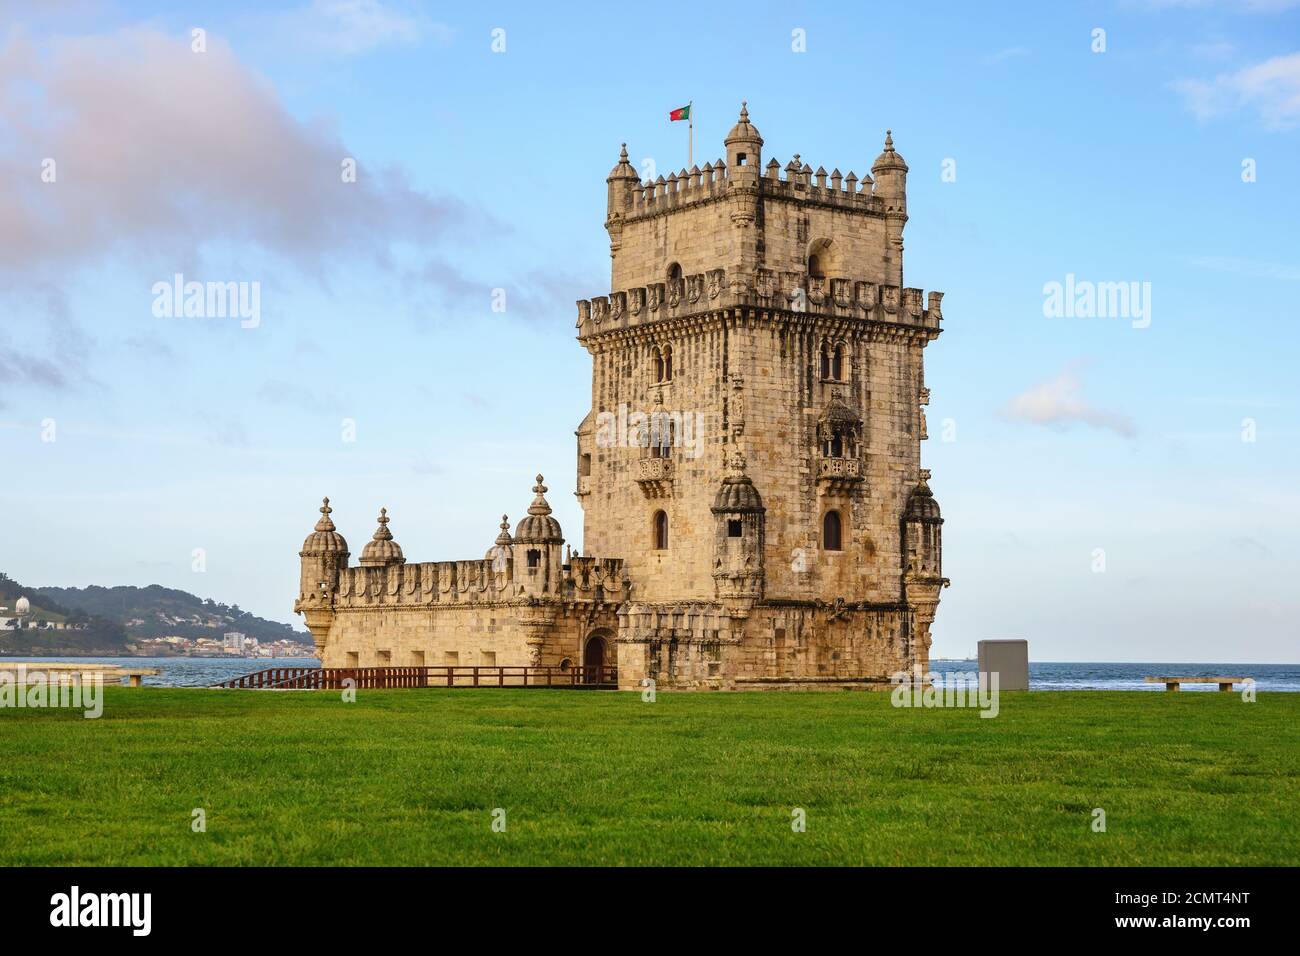 Lisbon Portugal city skyline at Belem Tower and Tagus River Stock Photo